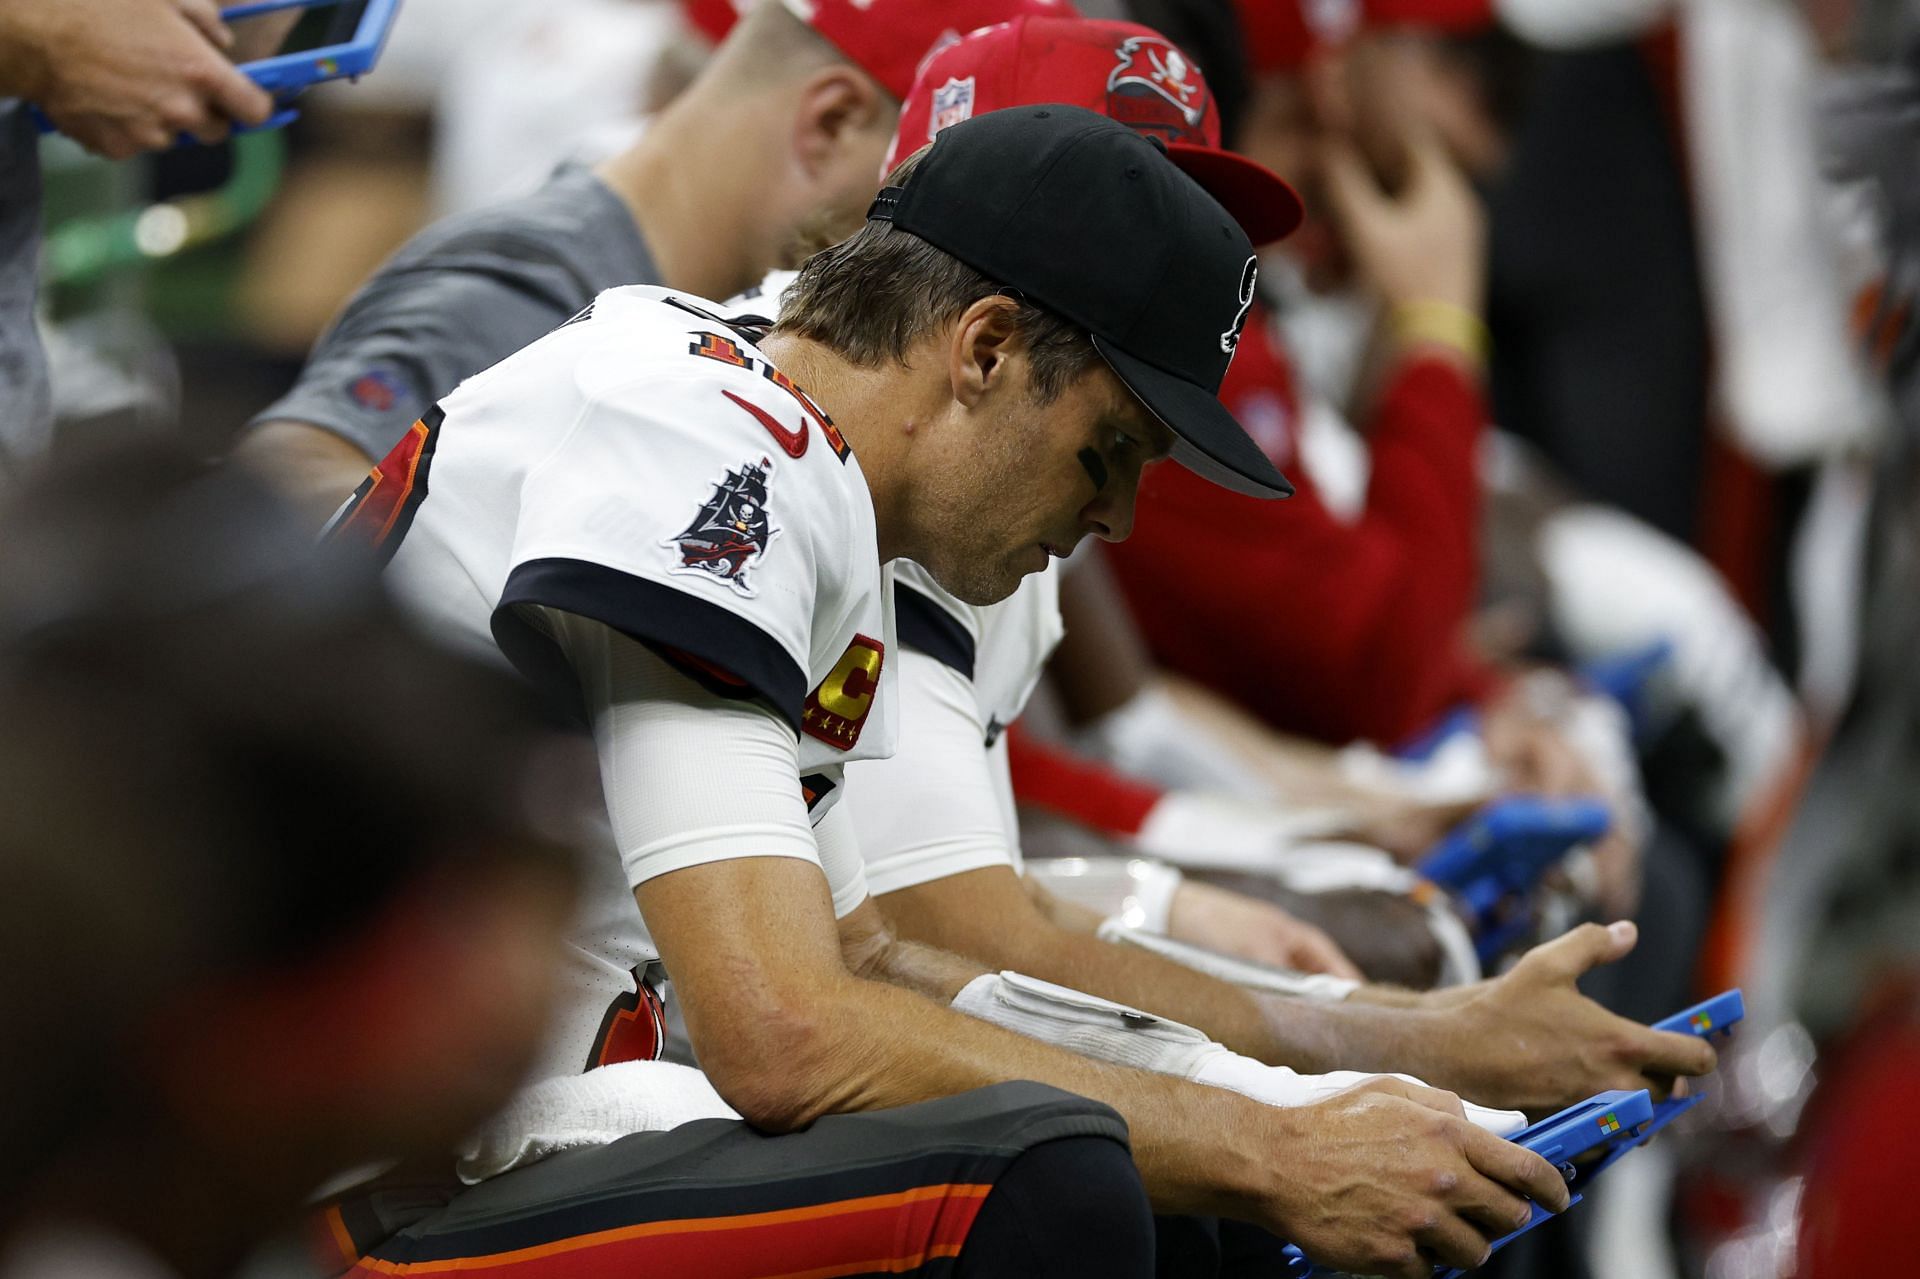 Tom Brady during the Tampa Bay Buccaneers v New Orleans Saints